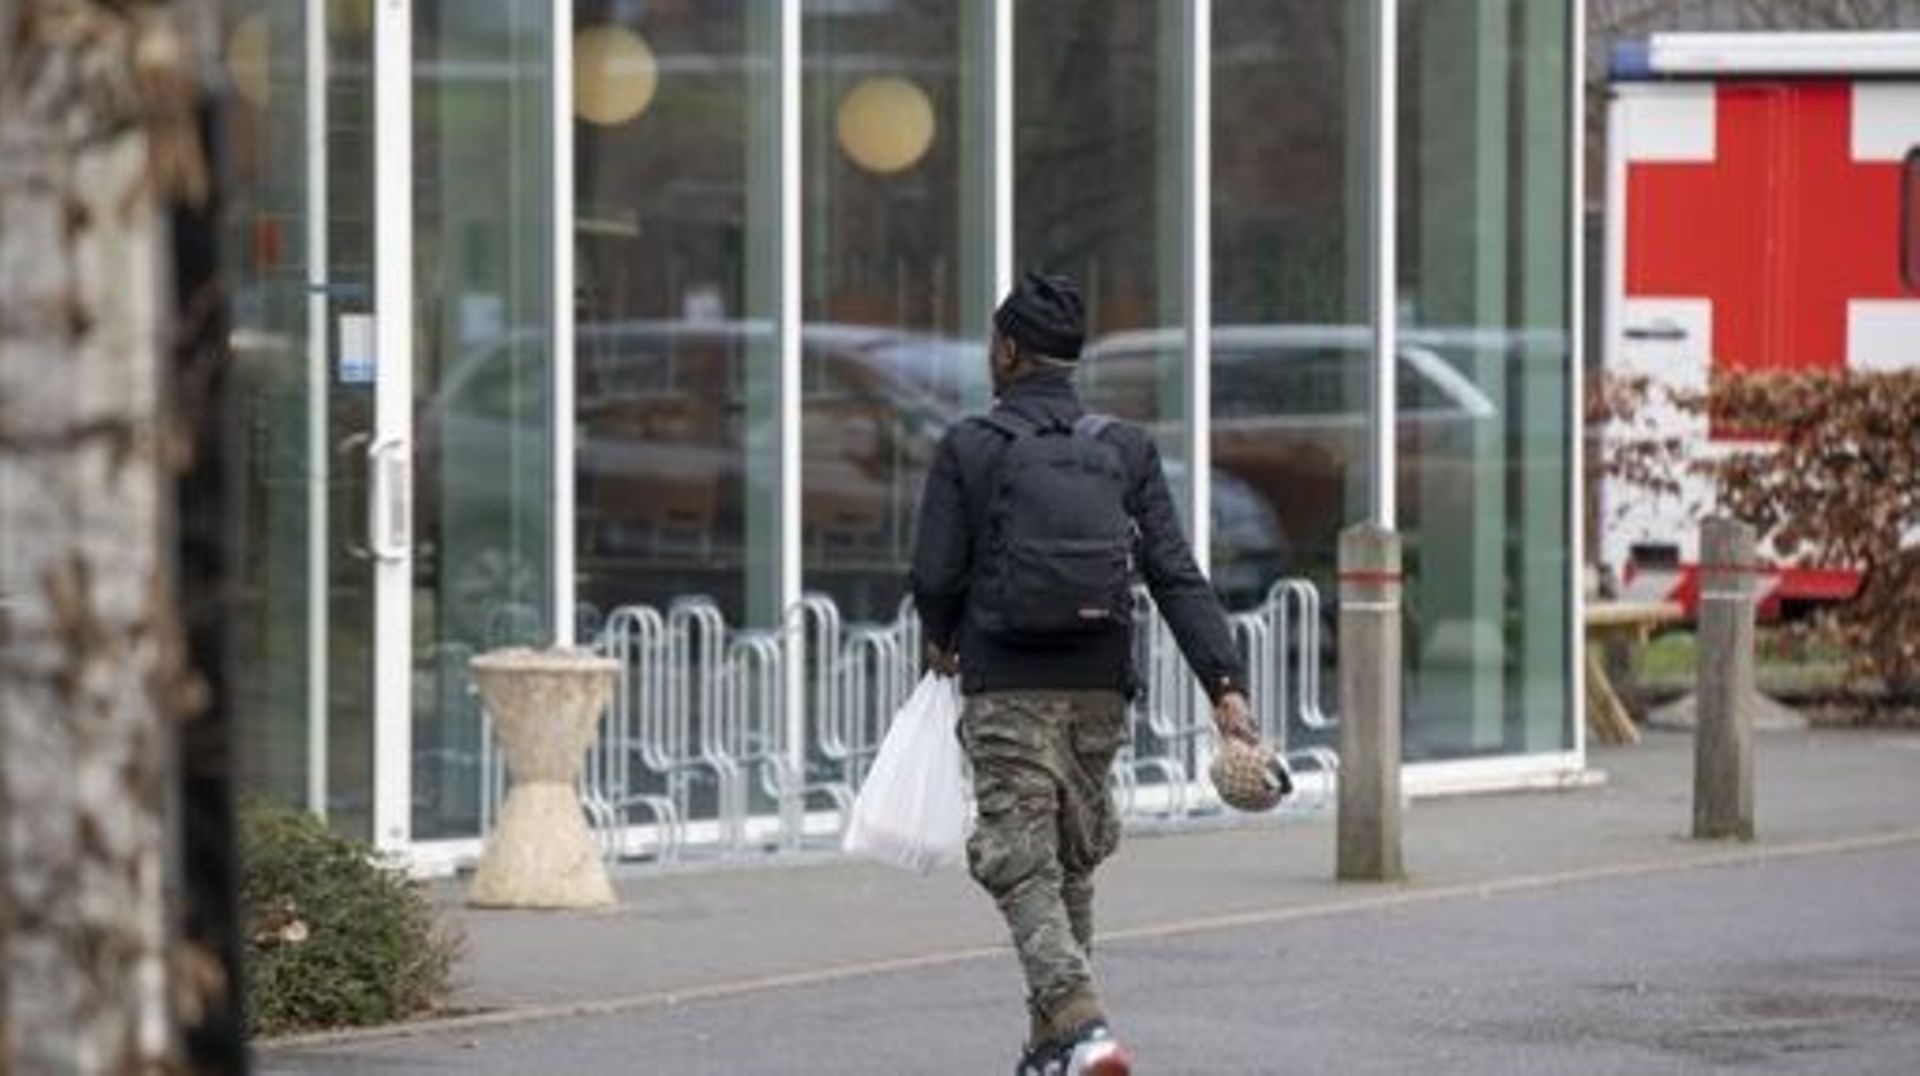 Illustration picture shows a man around the Ibis Budget Hotel in Ruisbroek, Sint-Pieters-Leeuw, Thursday 16 February 2023. Following the evacuation of the squatted so-called Palais des Droits – Rechtenpaleis building, at the Paleizenstraat – Rue des Palai